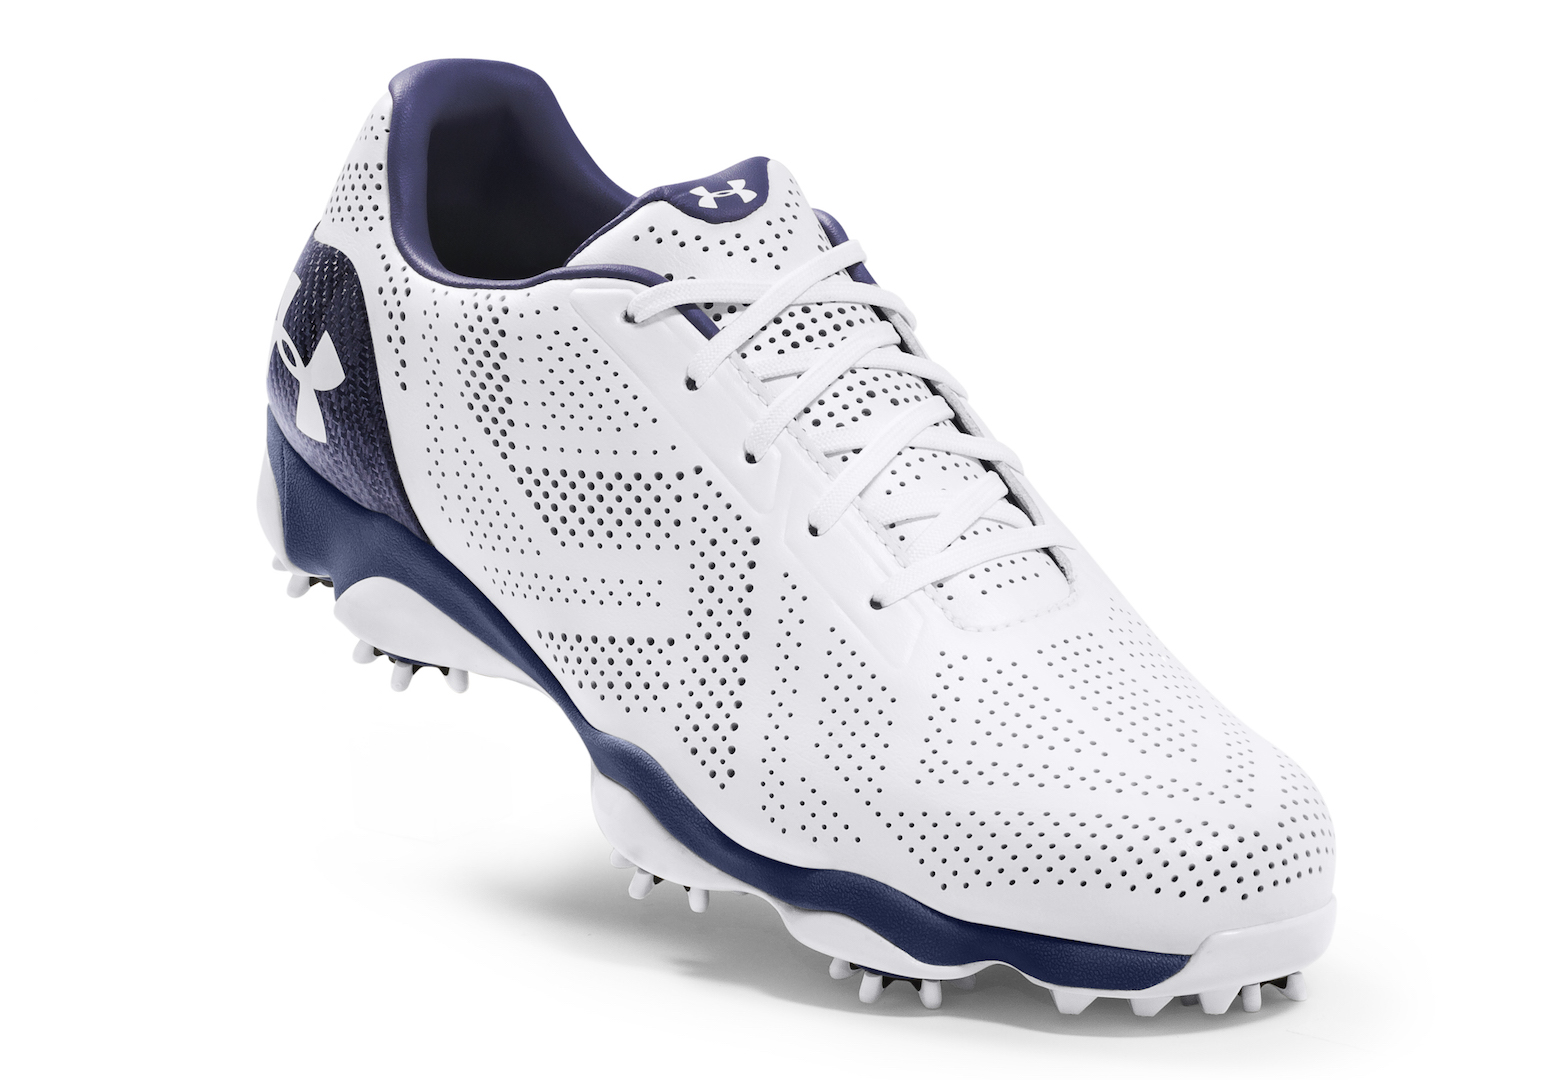 new under armour cleats 2018